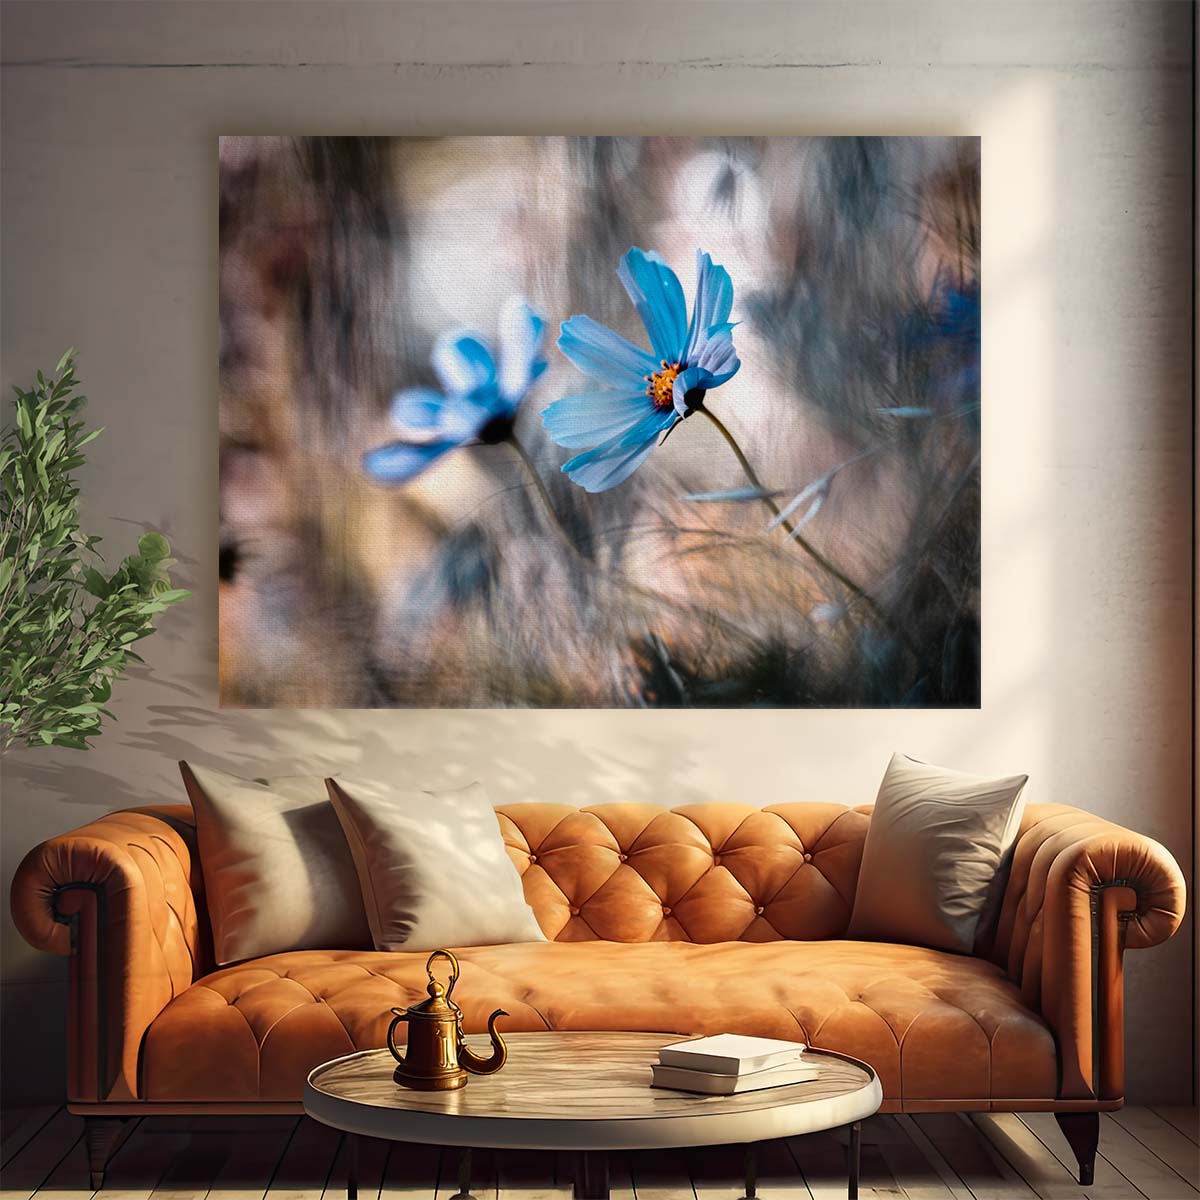 Blue Cosmos Flower Duo Macro Bokeh Wall Art by Luxuriance Designs. Made in USA.